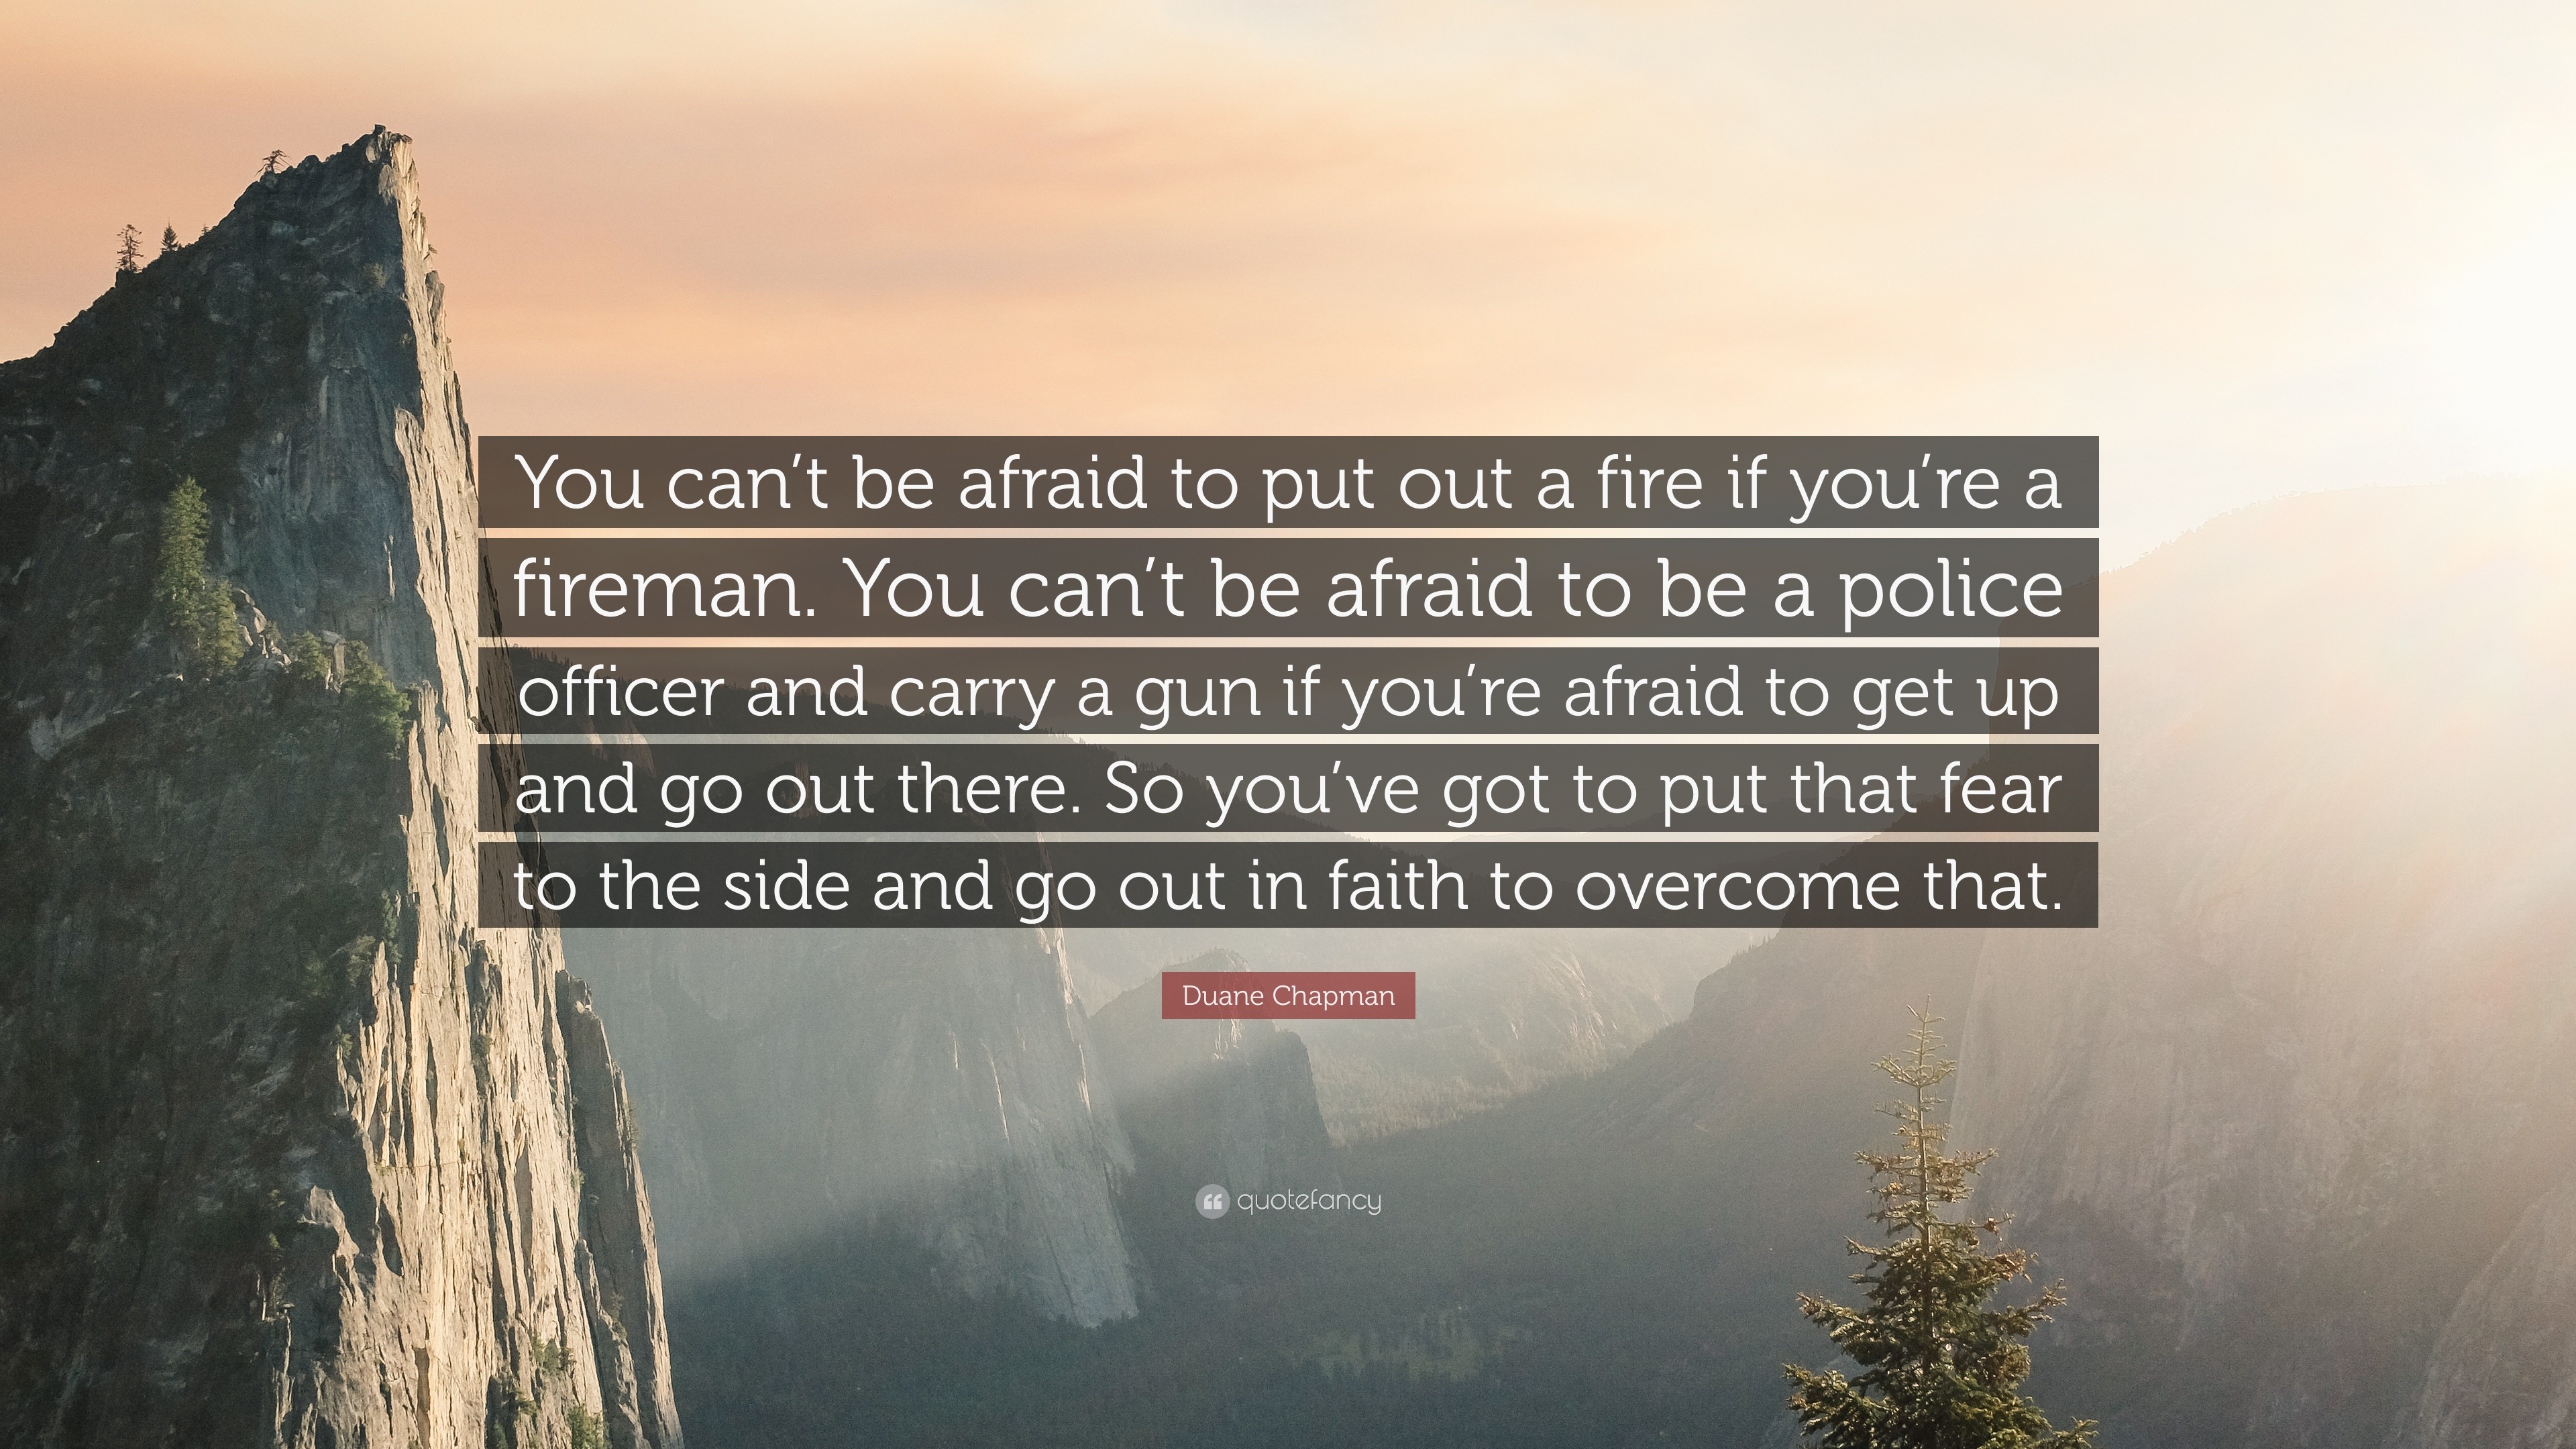 Duane Chapman Quote You Can T Be Afraid To Put Out A Fire If You Re A Fireman You Can T Be Afraid To Be A Police Officer And Carry A Gun If 7 Wallpapers